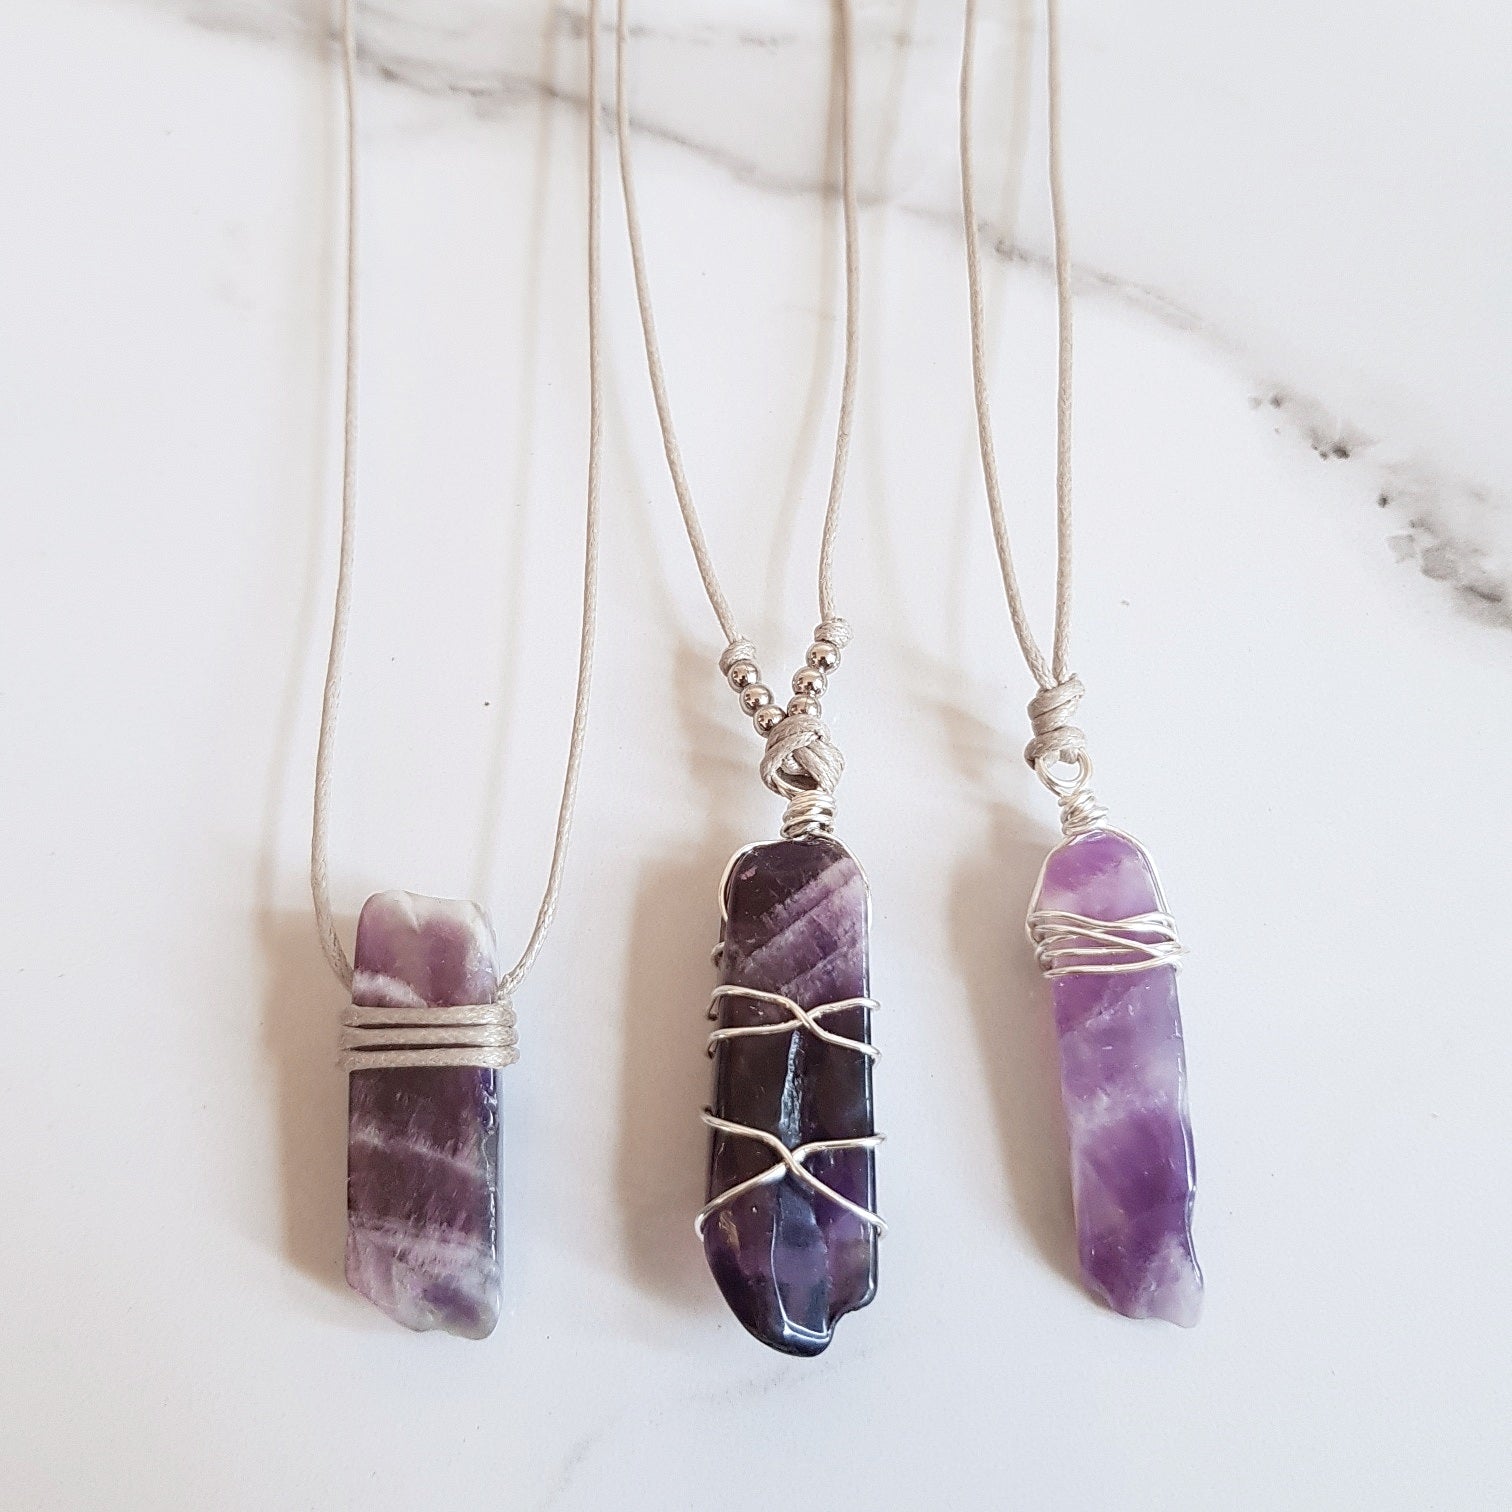 Natural Cord Pendant Necklaces - Amethyst